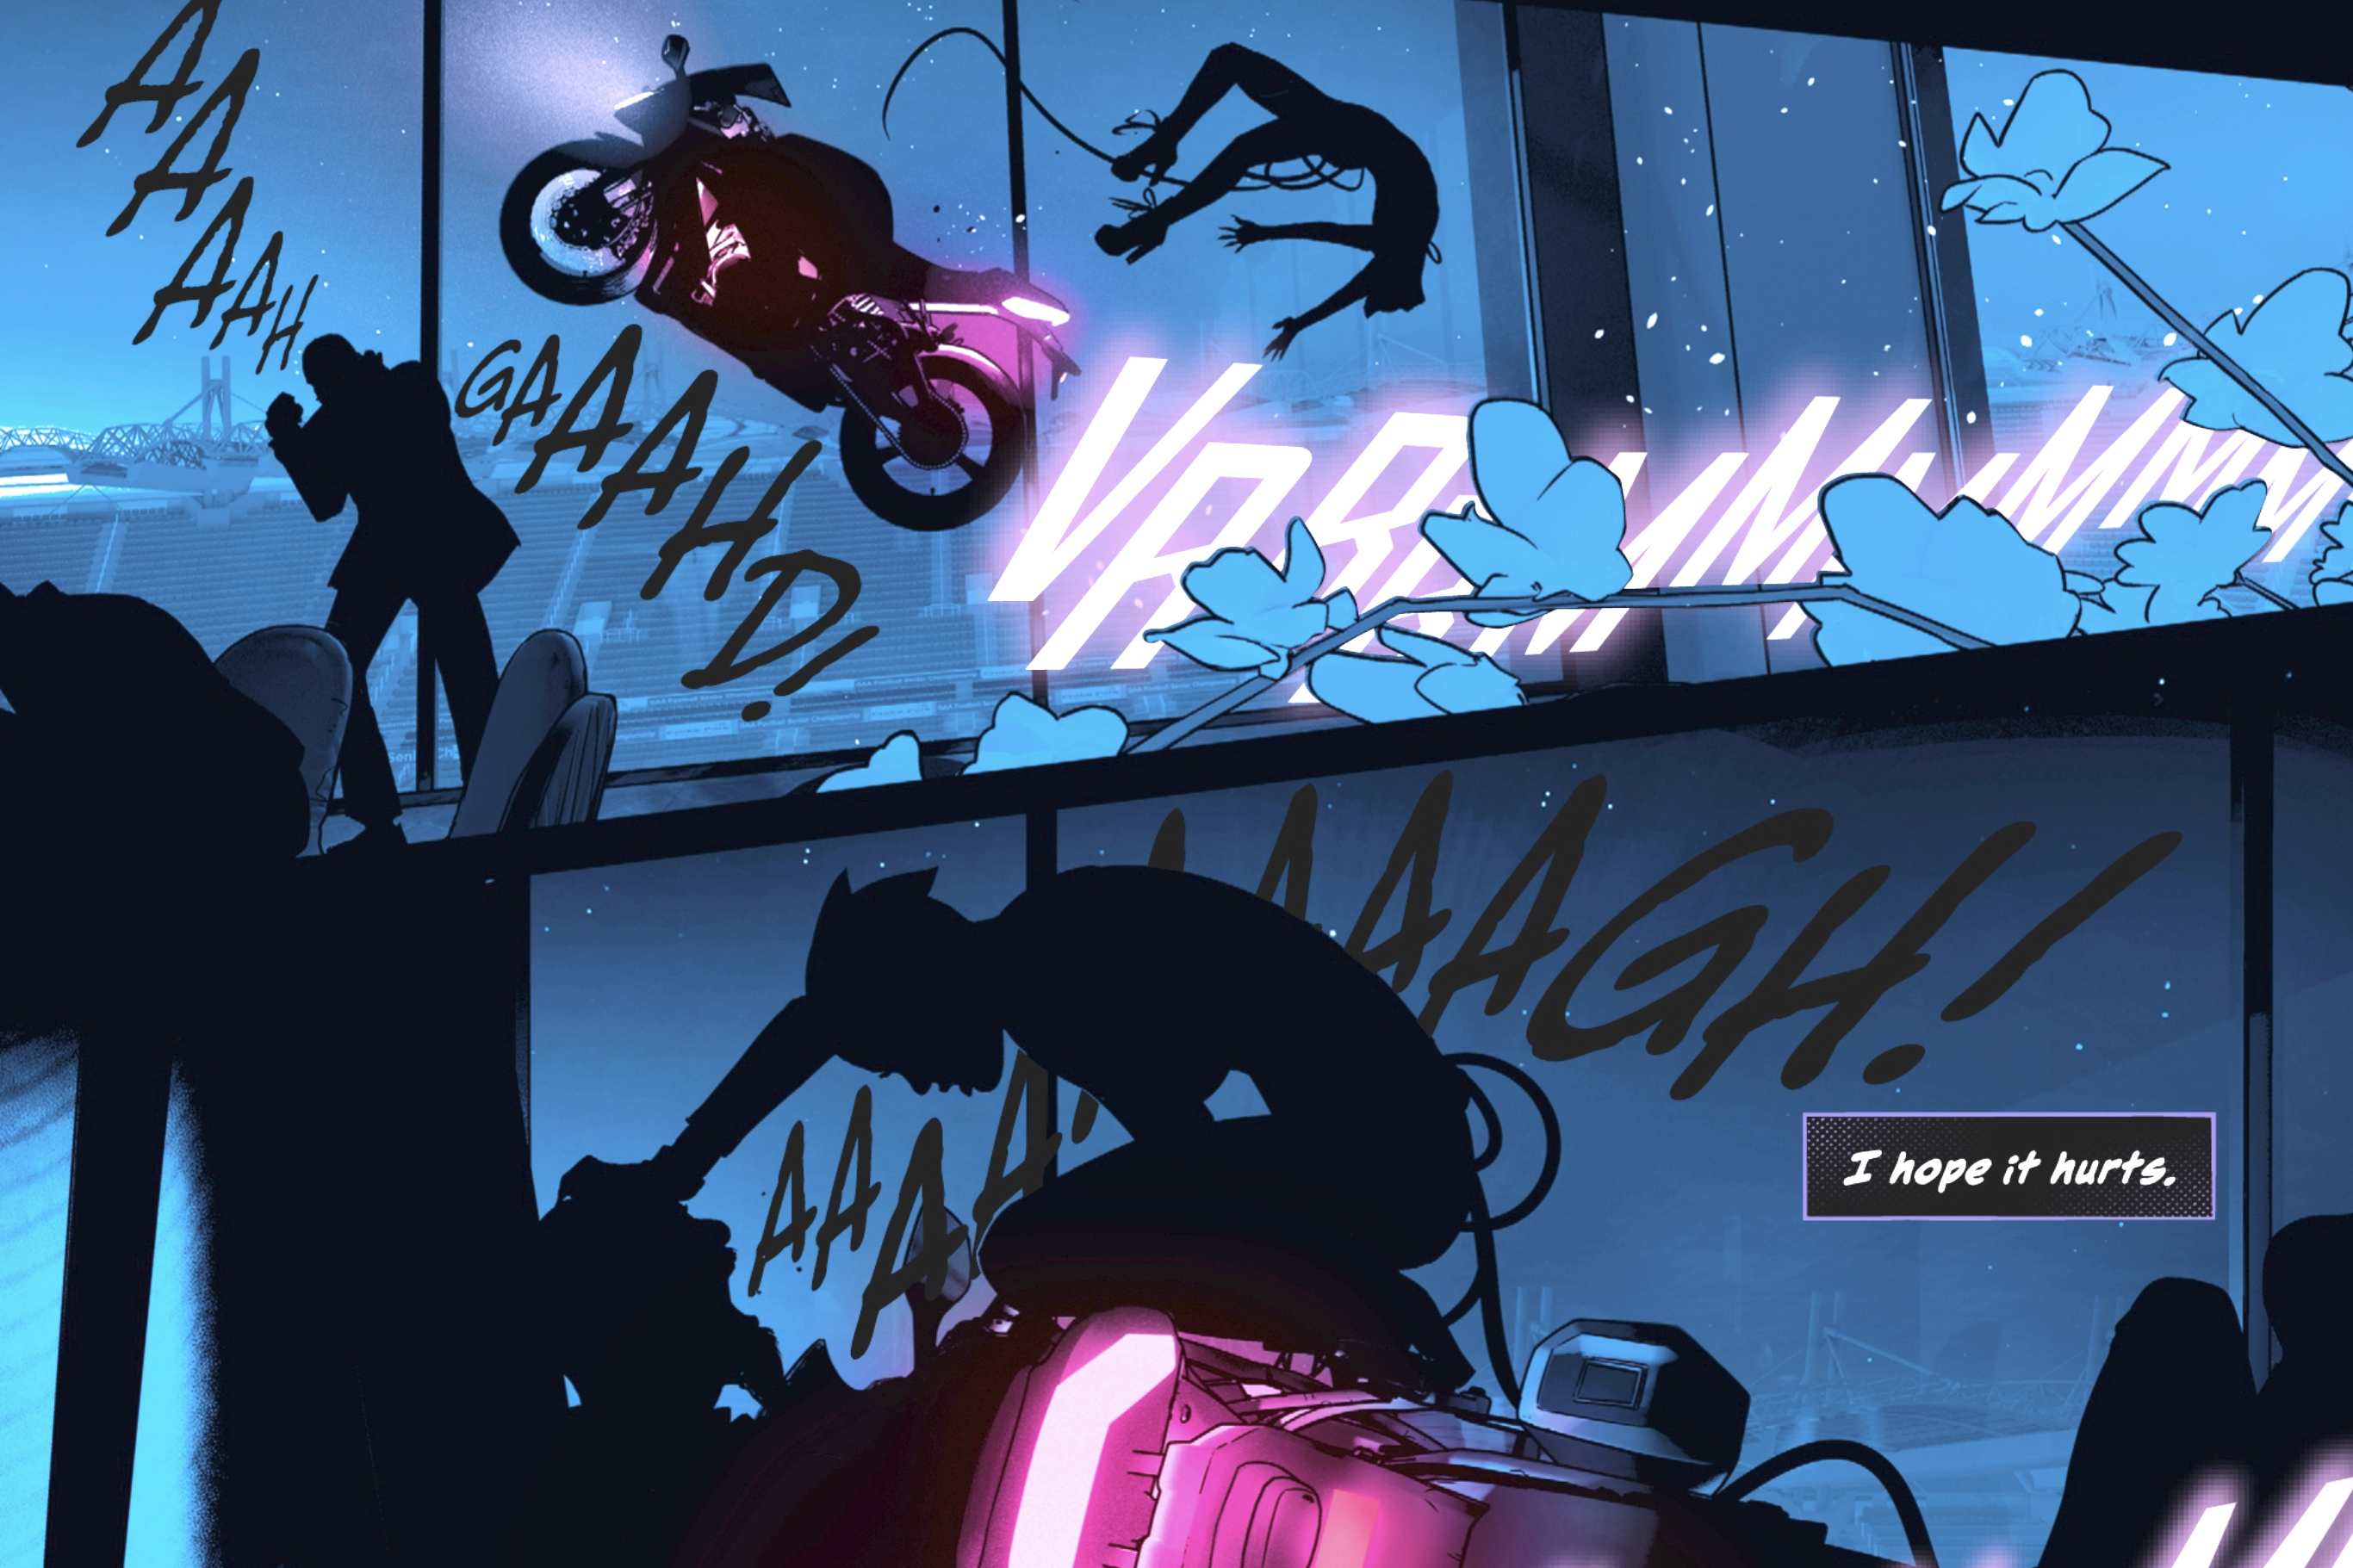 Catwoman flips backwards off of a speeding motorcycle, sending it careening towards a screaming man, before pouncing on the cycle, pinning the man beneath it in Catwoman #40 (2022).